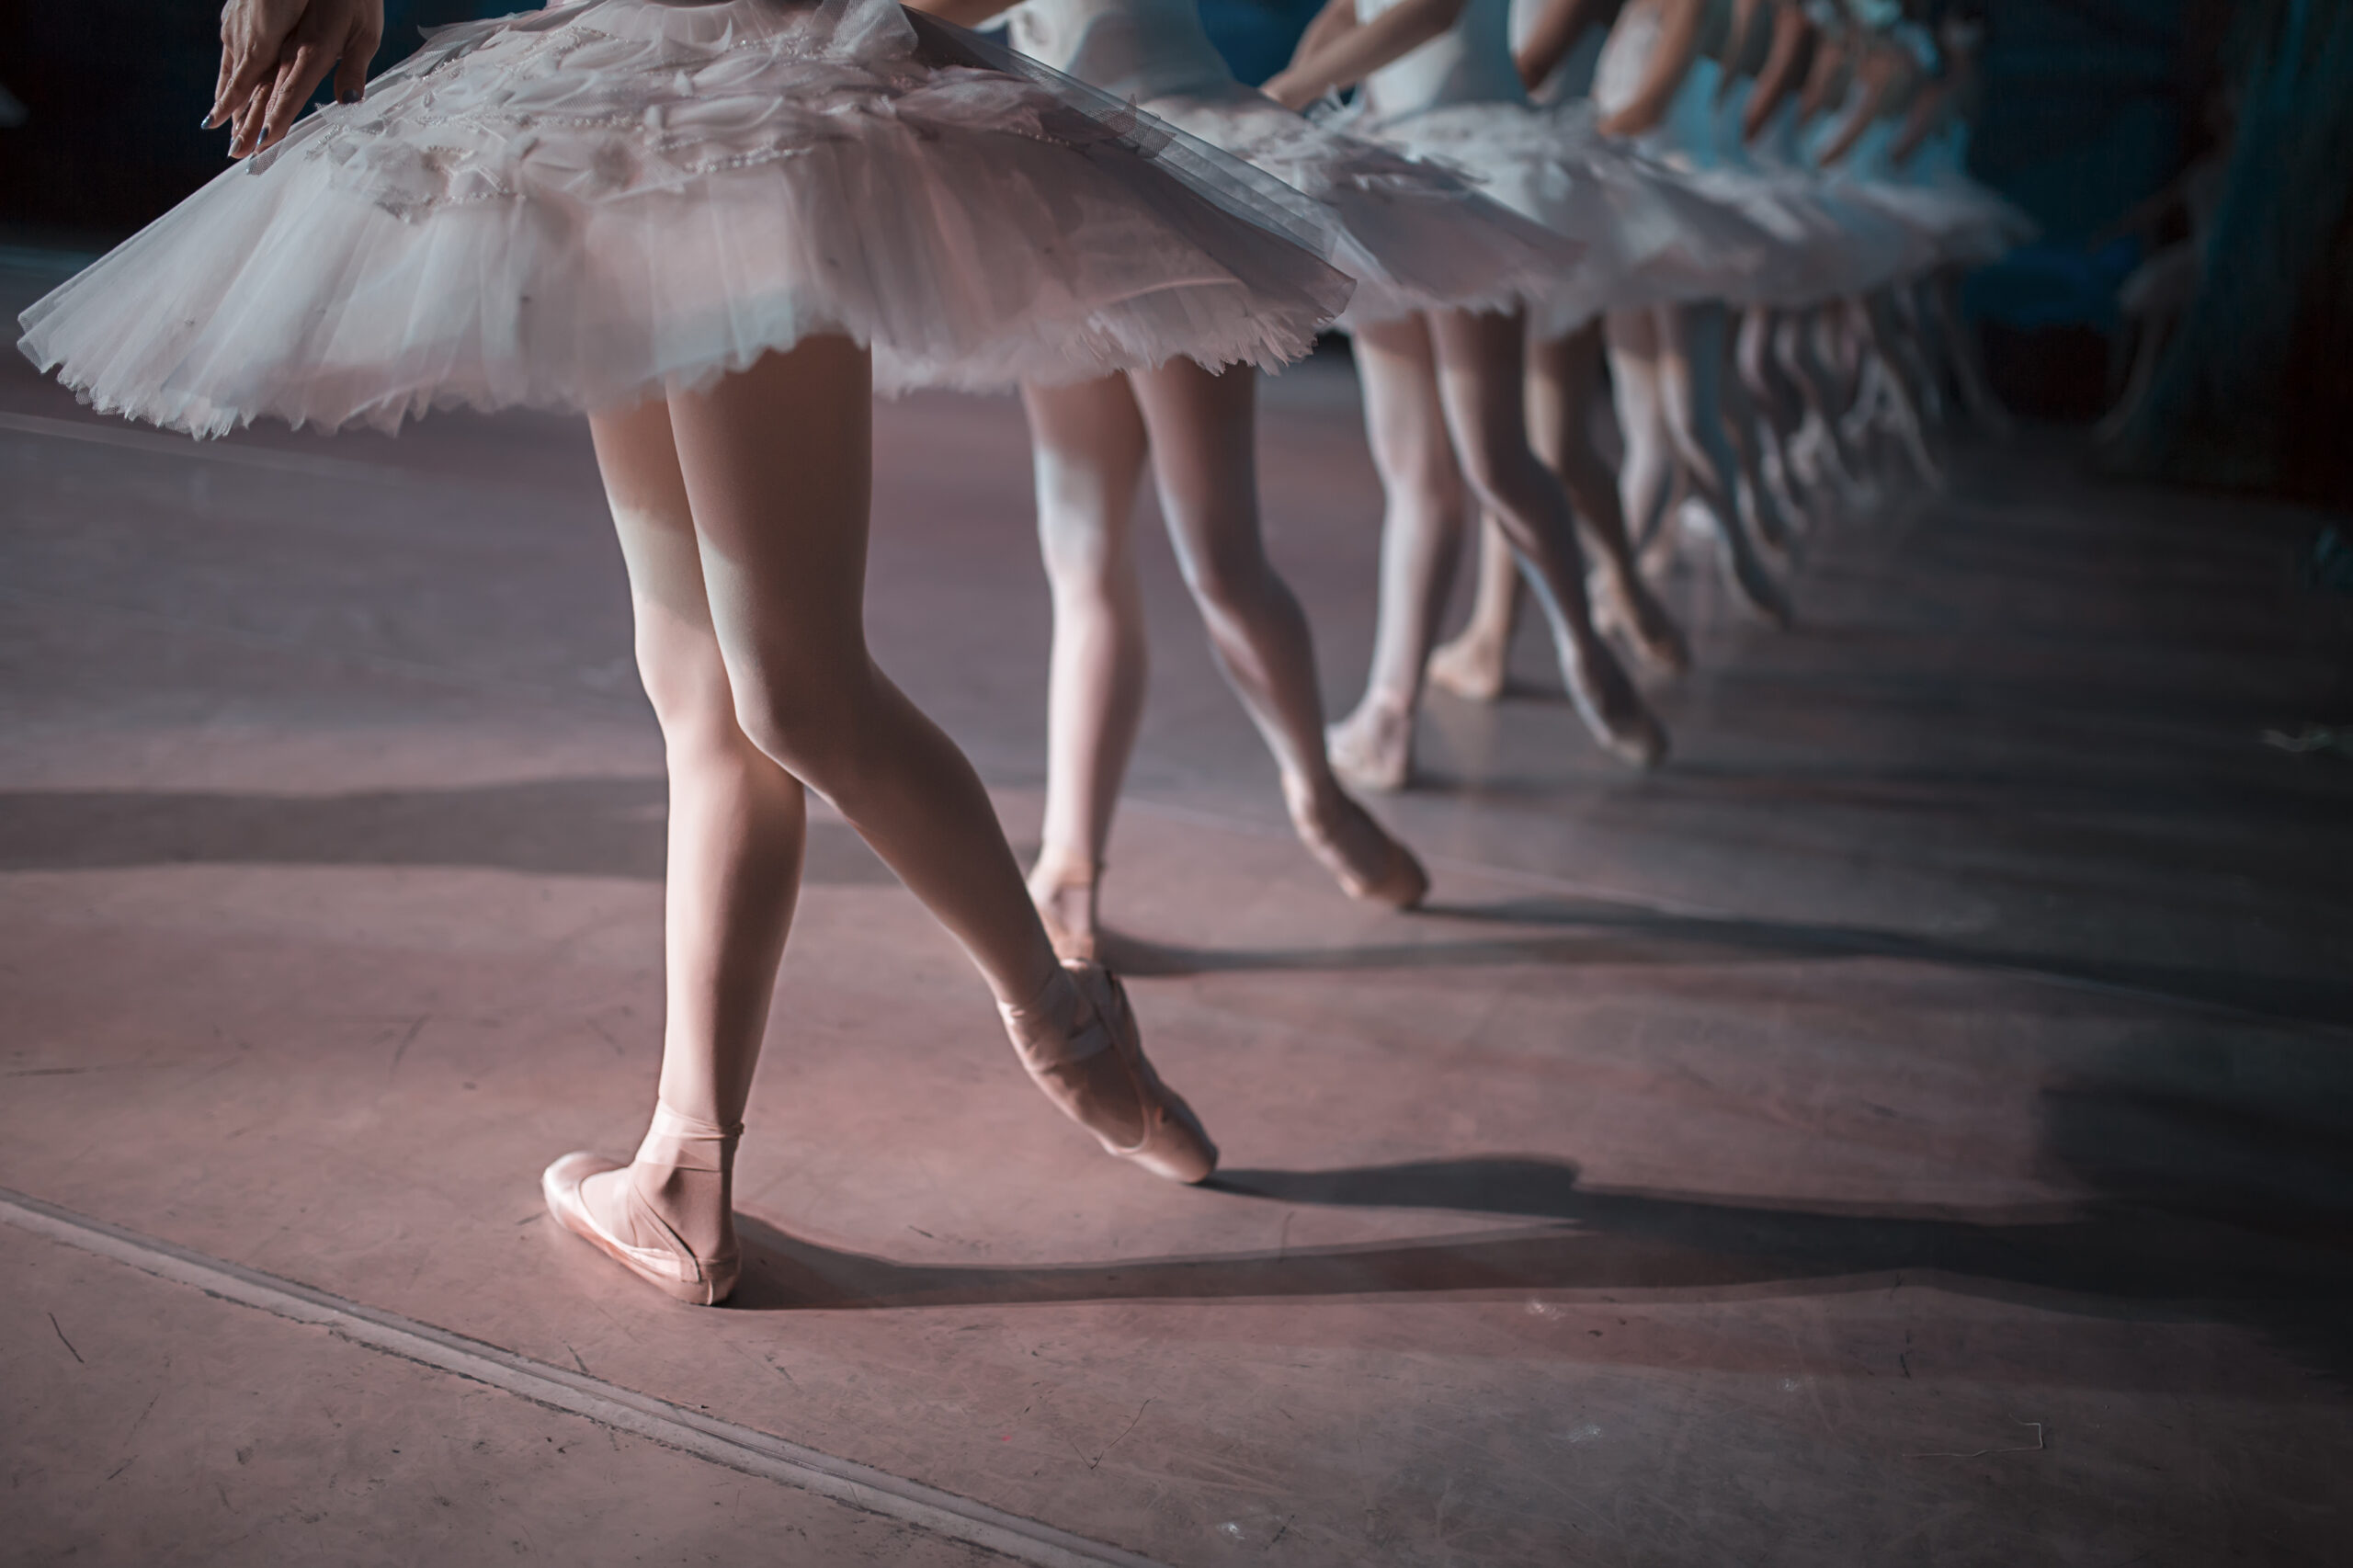 A line of dancers in white tutu are shown from the waist down, each one in pointe shoes and tights with one foot tucked behind the other